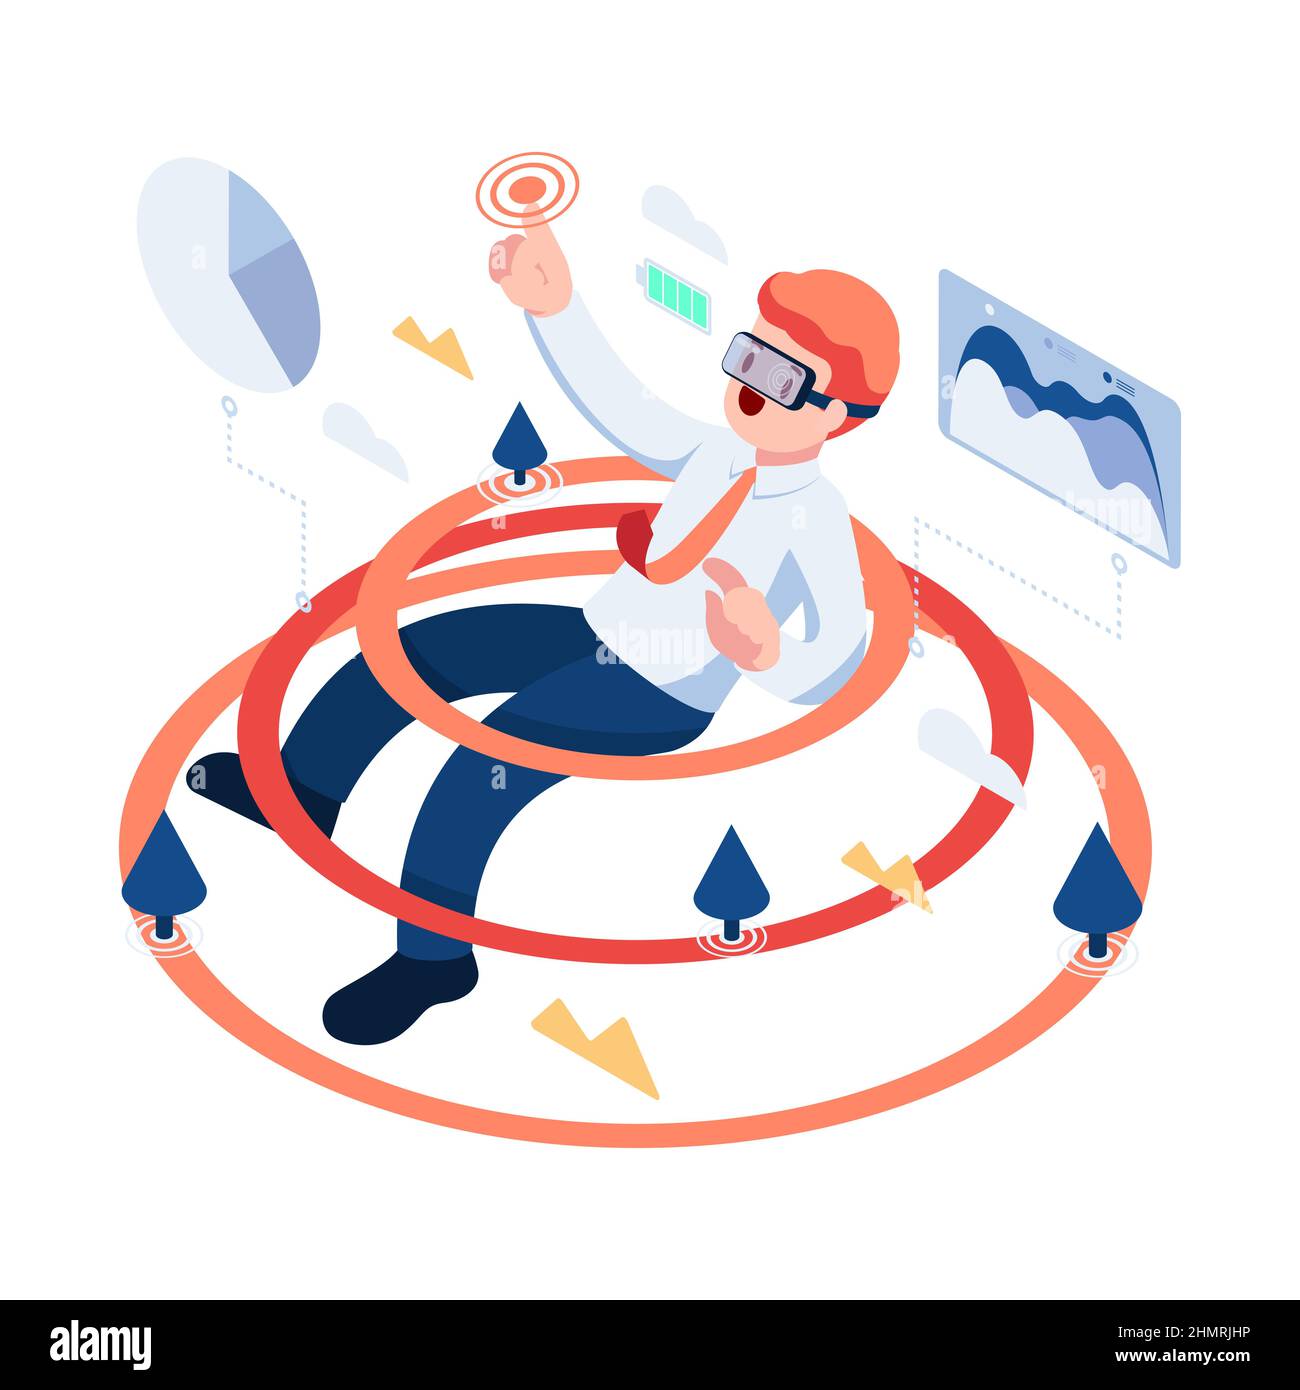 Flat 3d Isometric Businessman Playing in Virtual Reality World with VR Goggles. Metaverse and Virtual Reality Technology Concept. Stock Vector